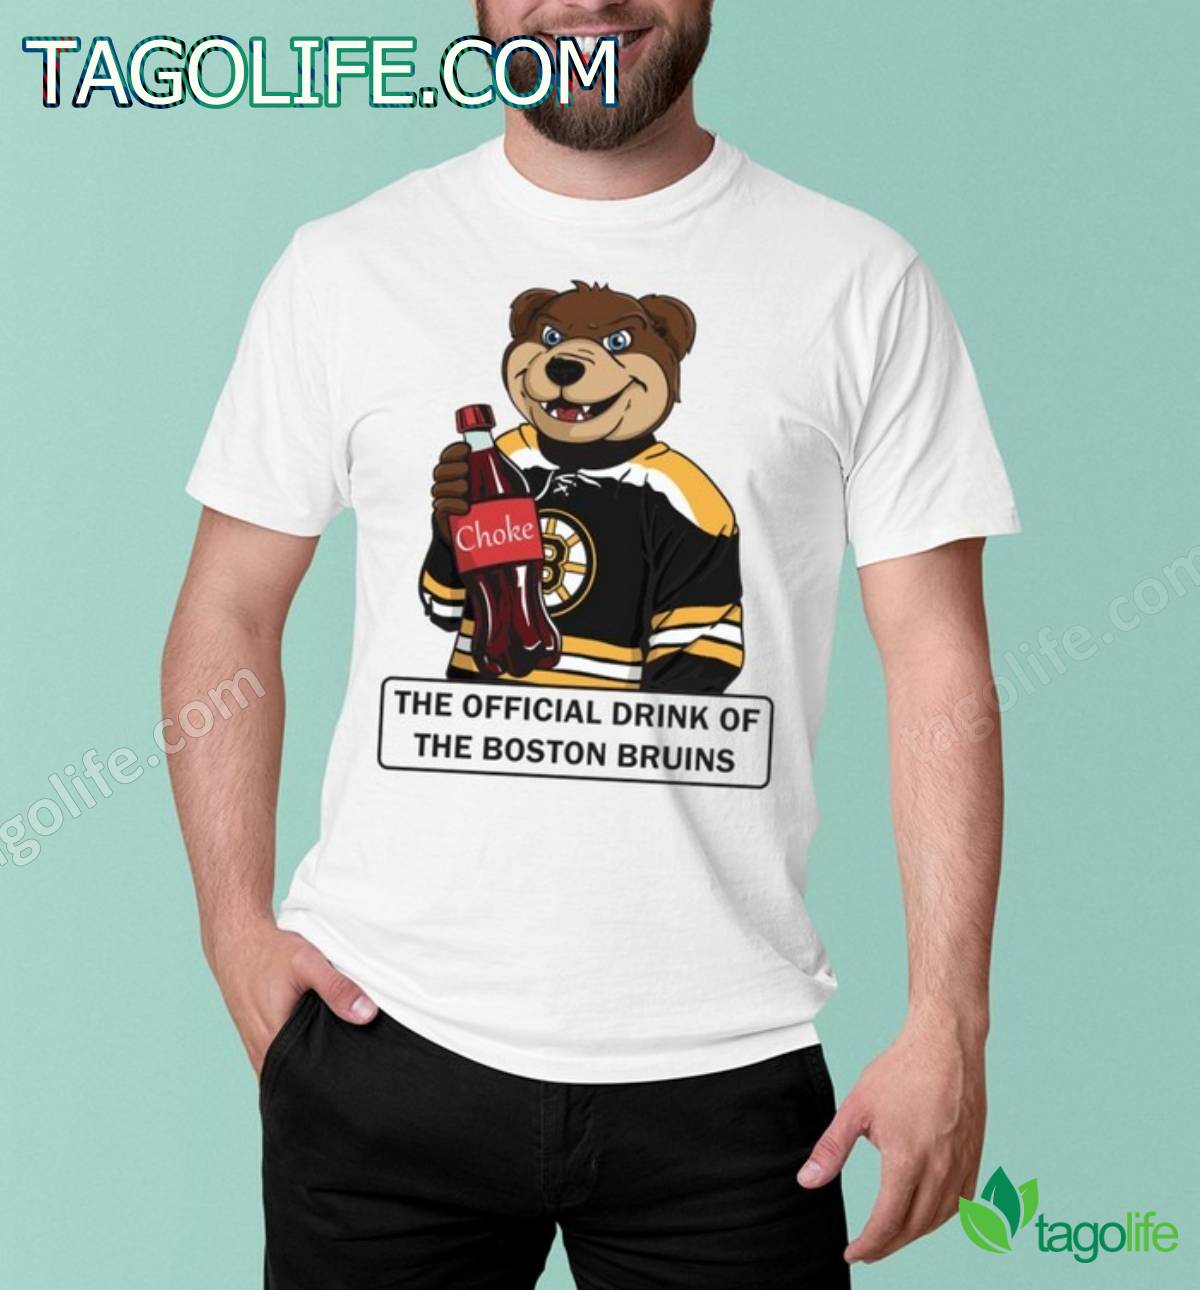 The Official Drink Of The Boston Bruins Shirt, Tank Top